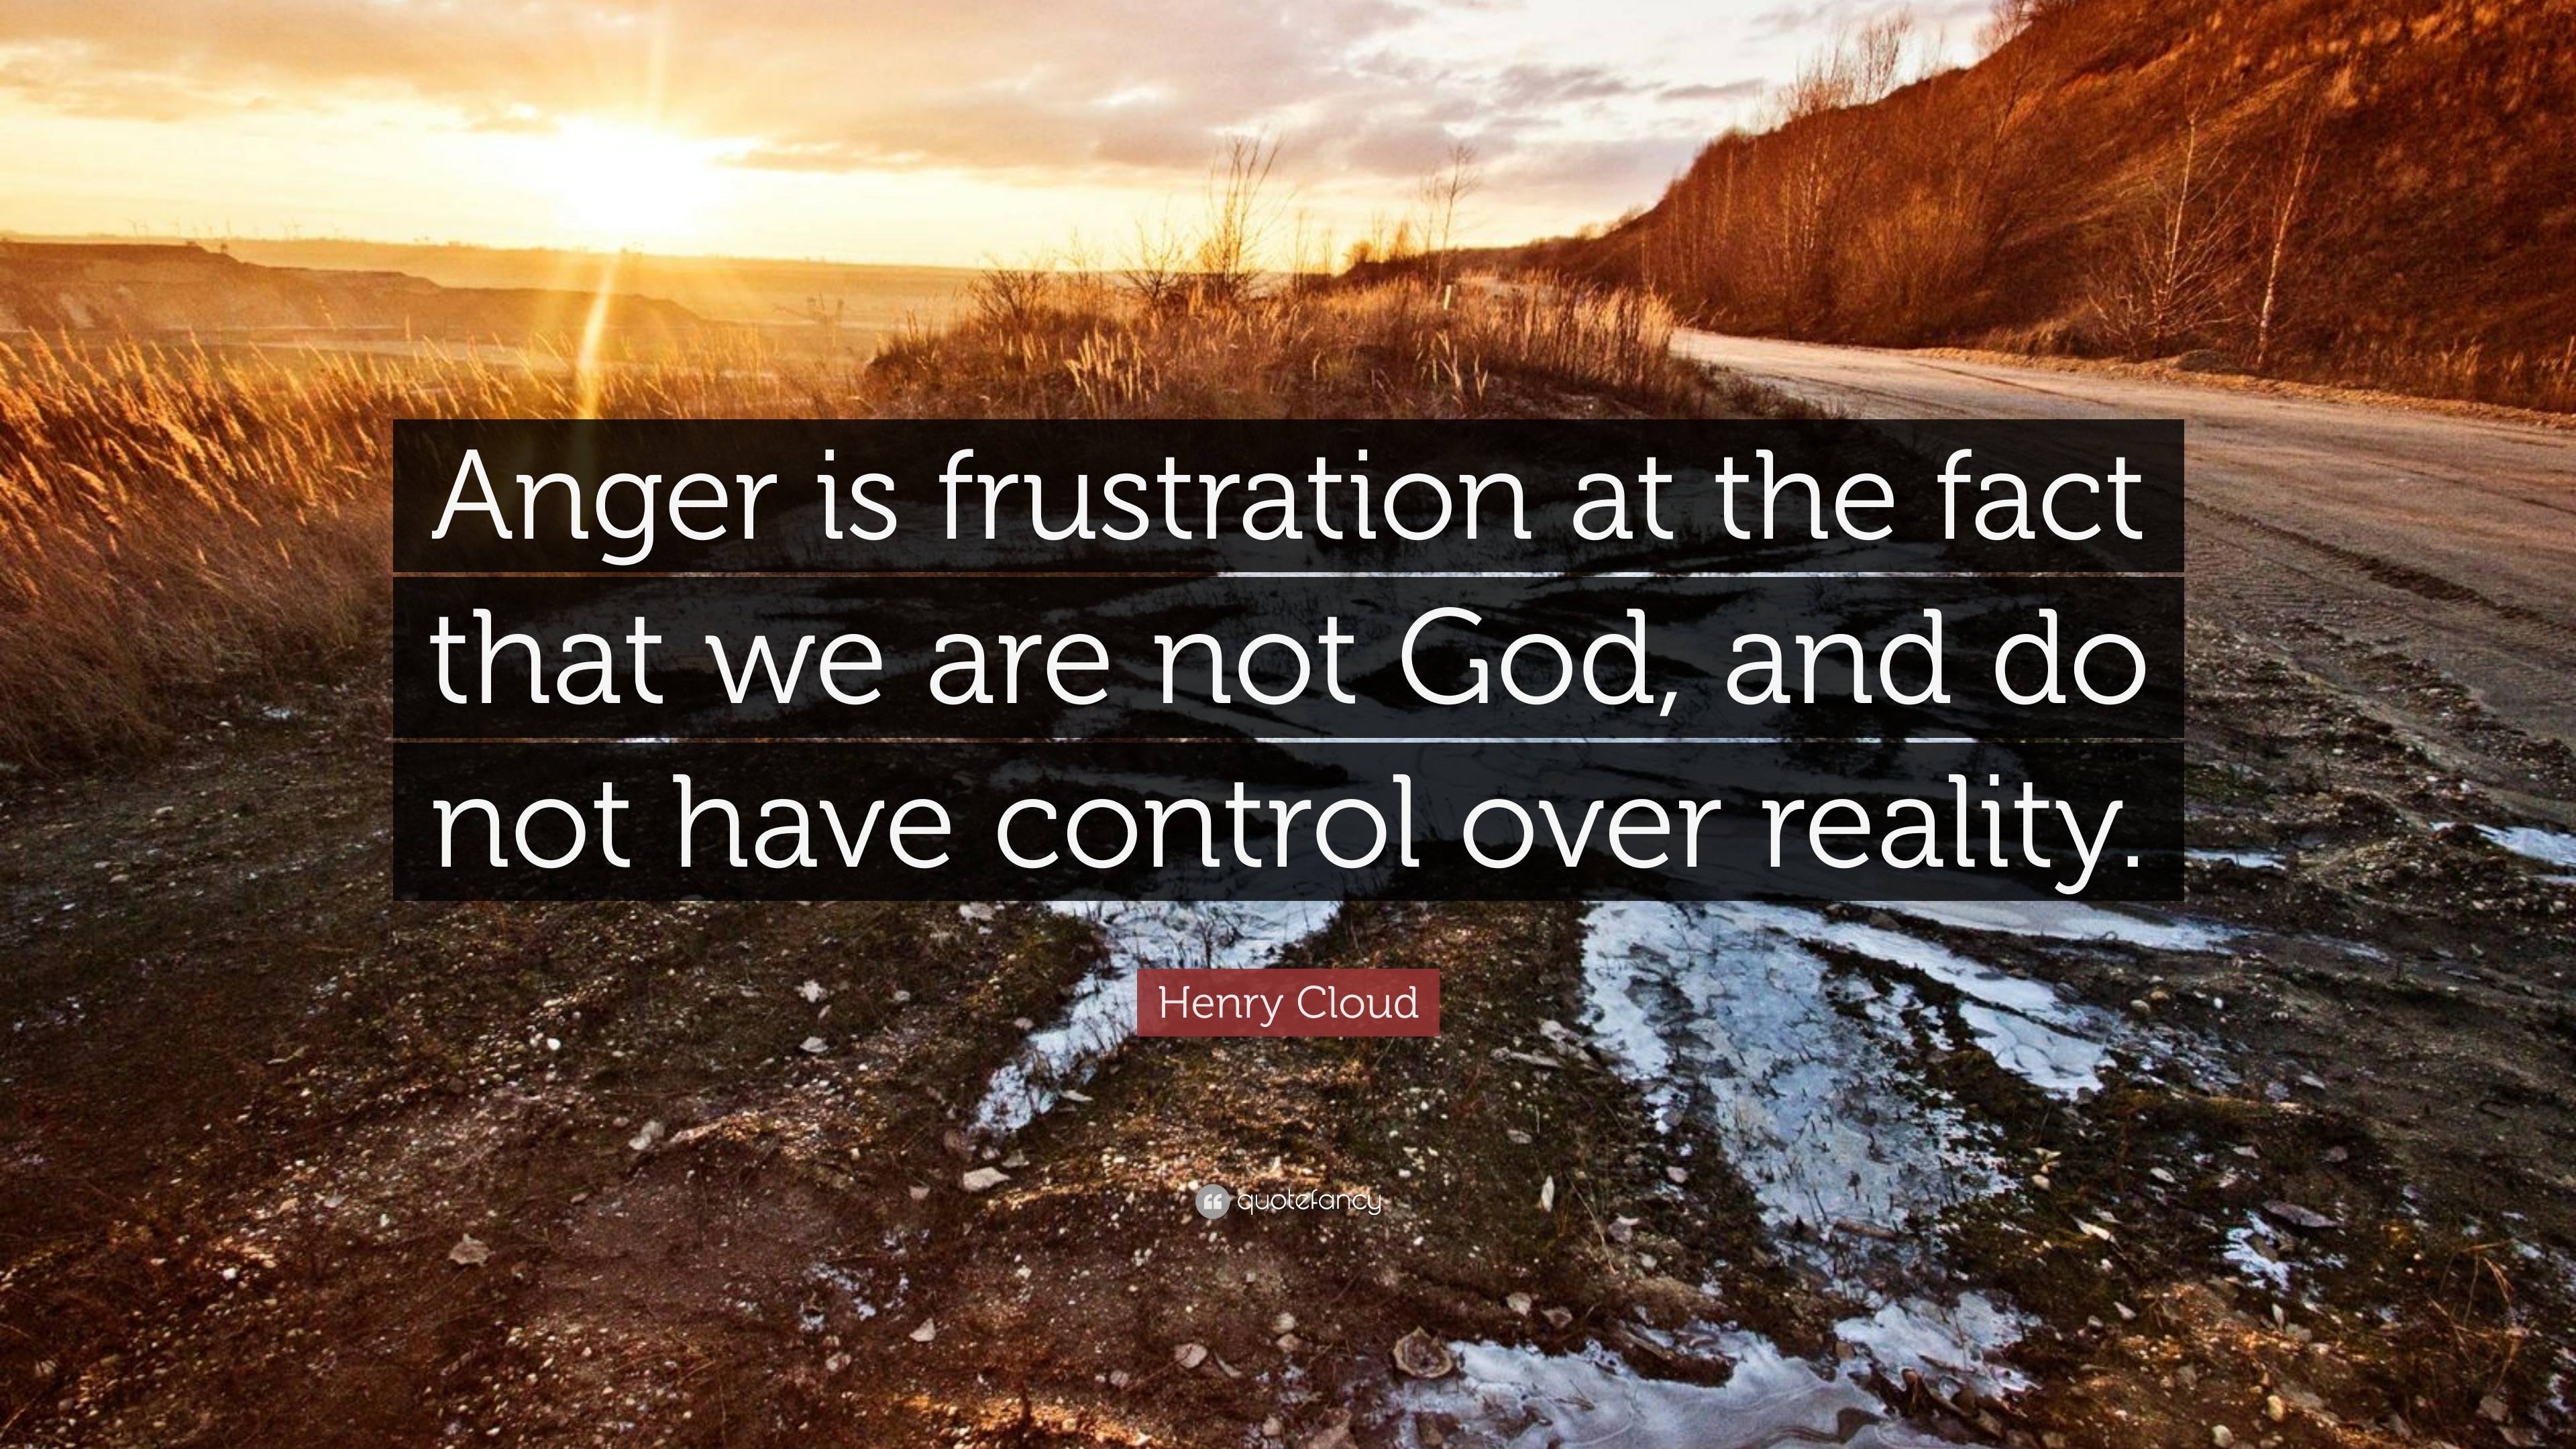 Henry Cloud Quote: “Anger is frustration at the fact that we are not